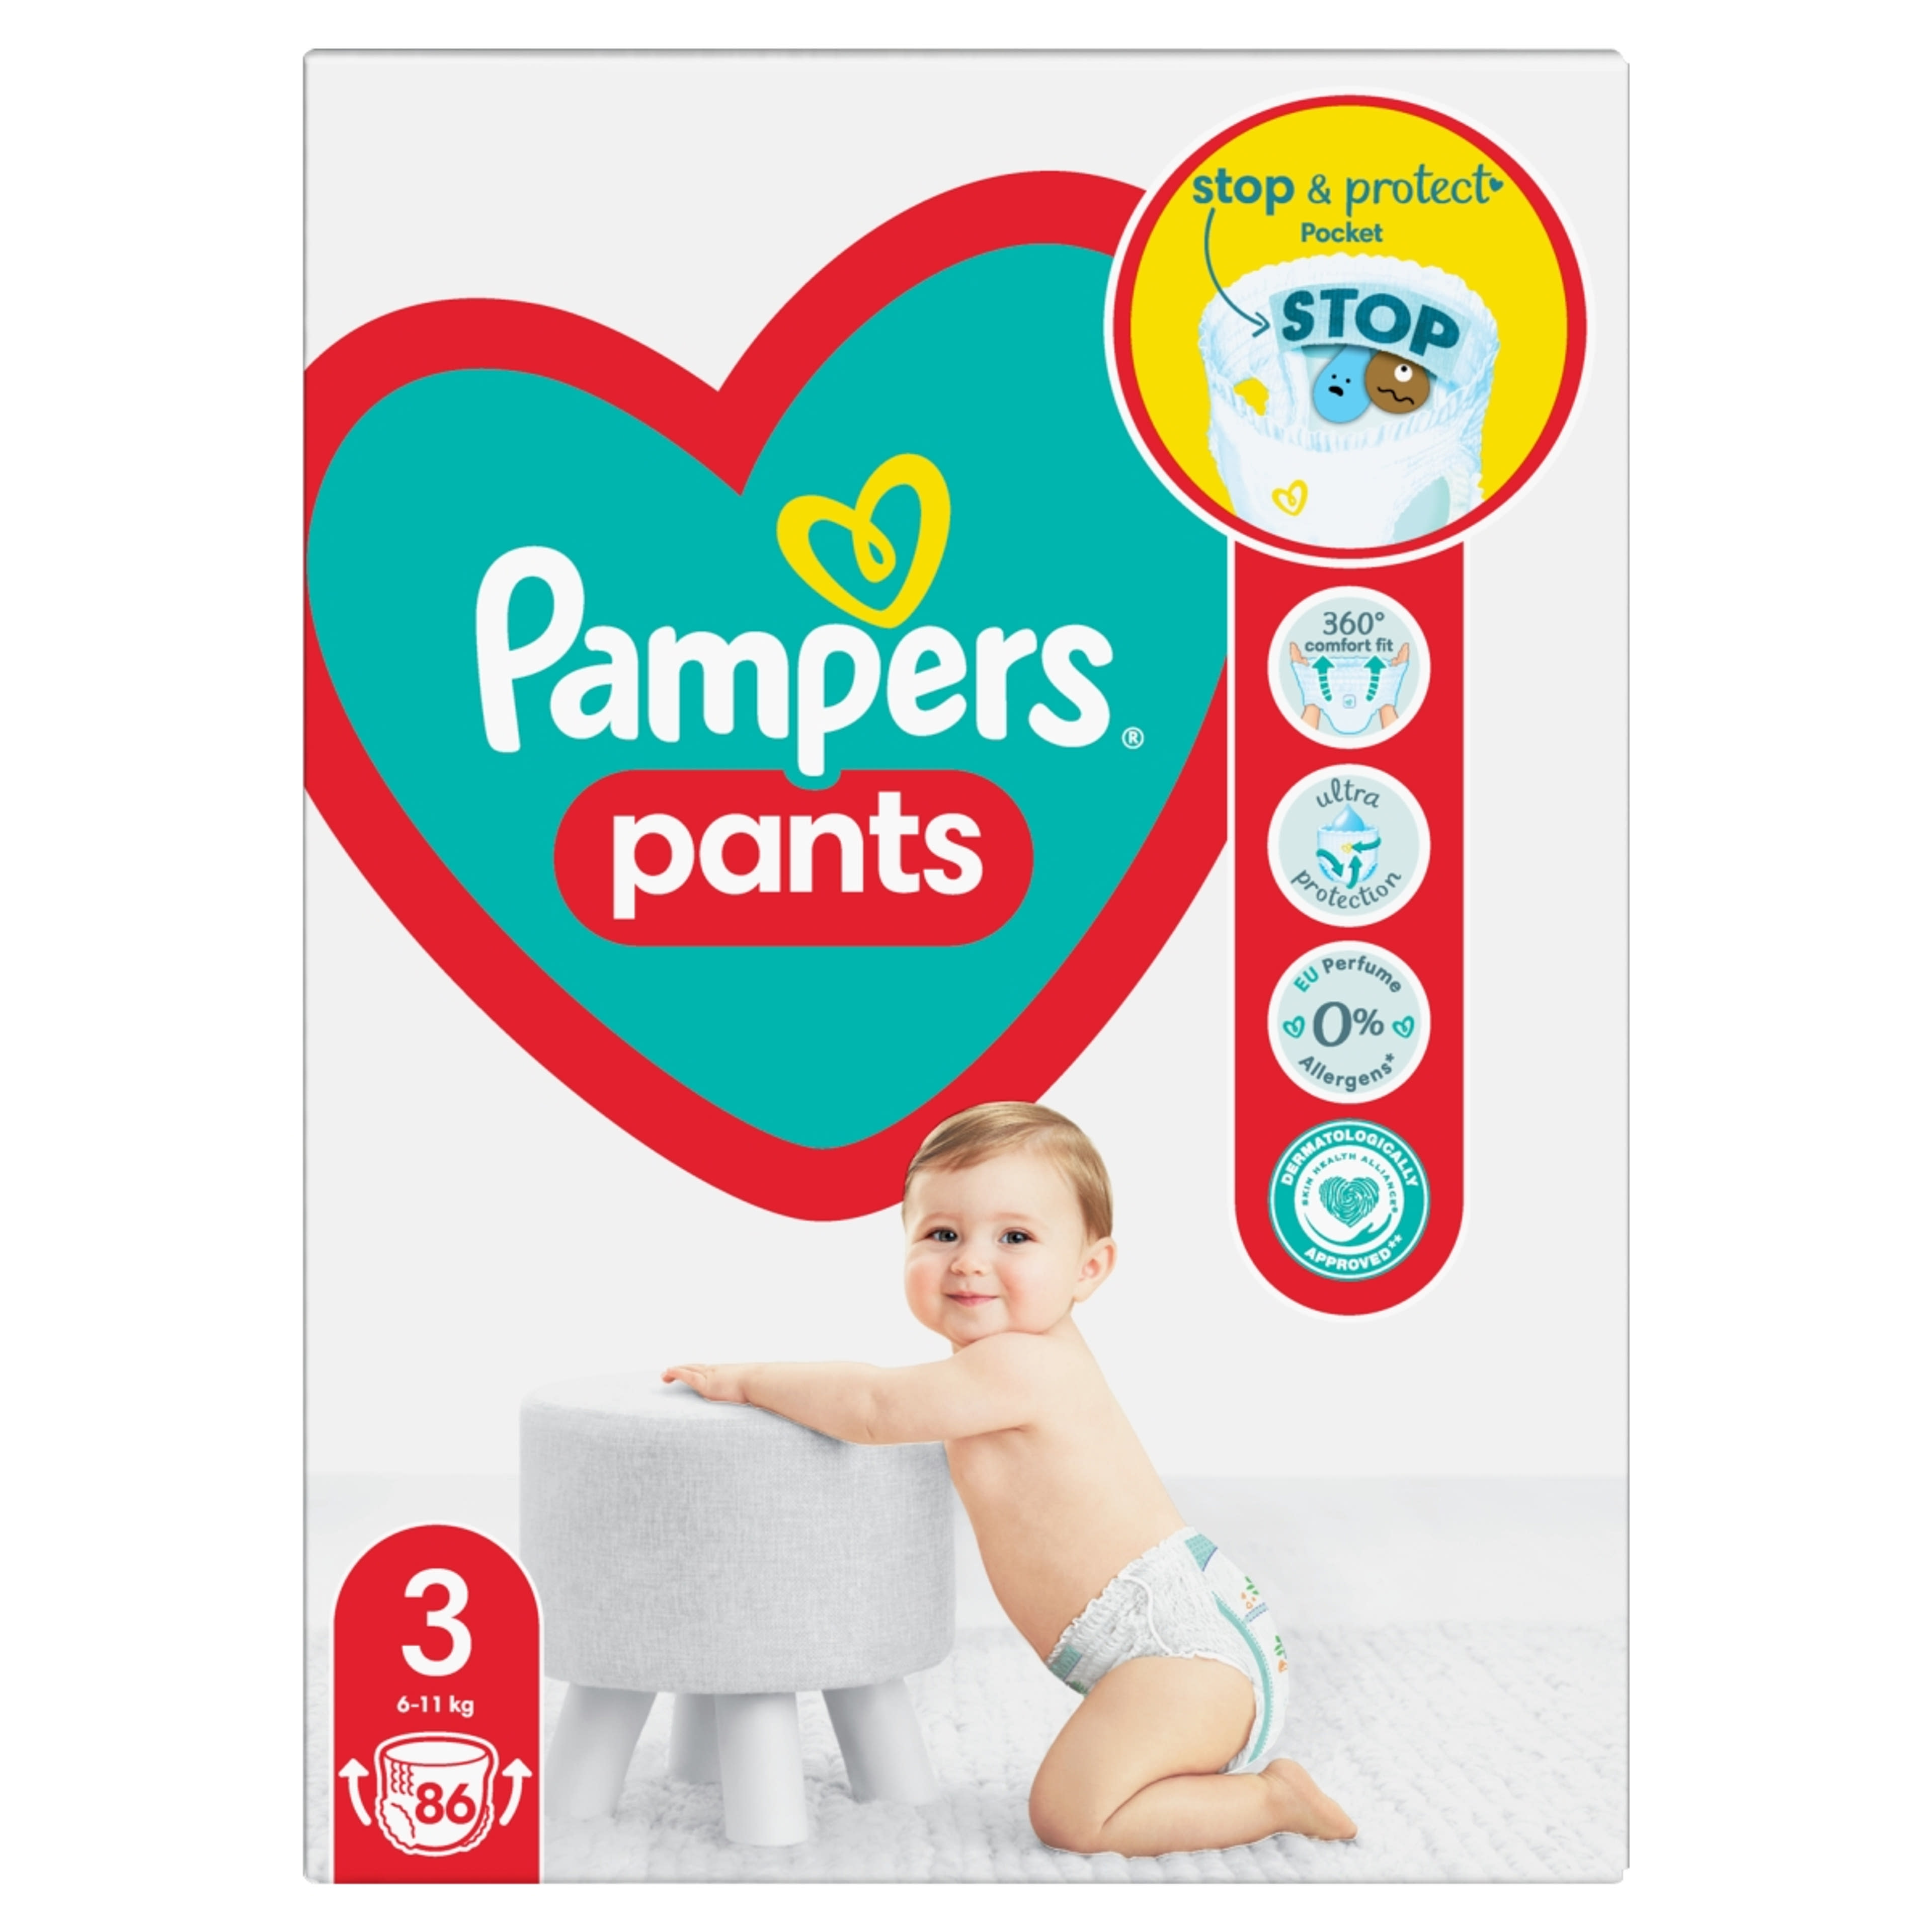 Pampers Pants Giant Pack+ 3-as 6-11 kg - 86 db